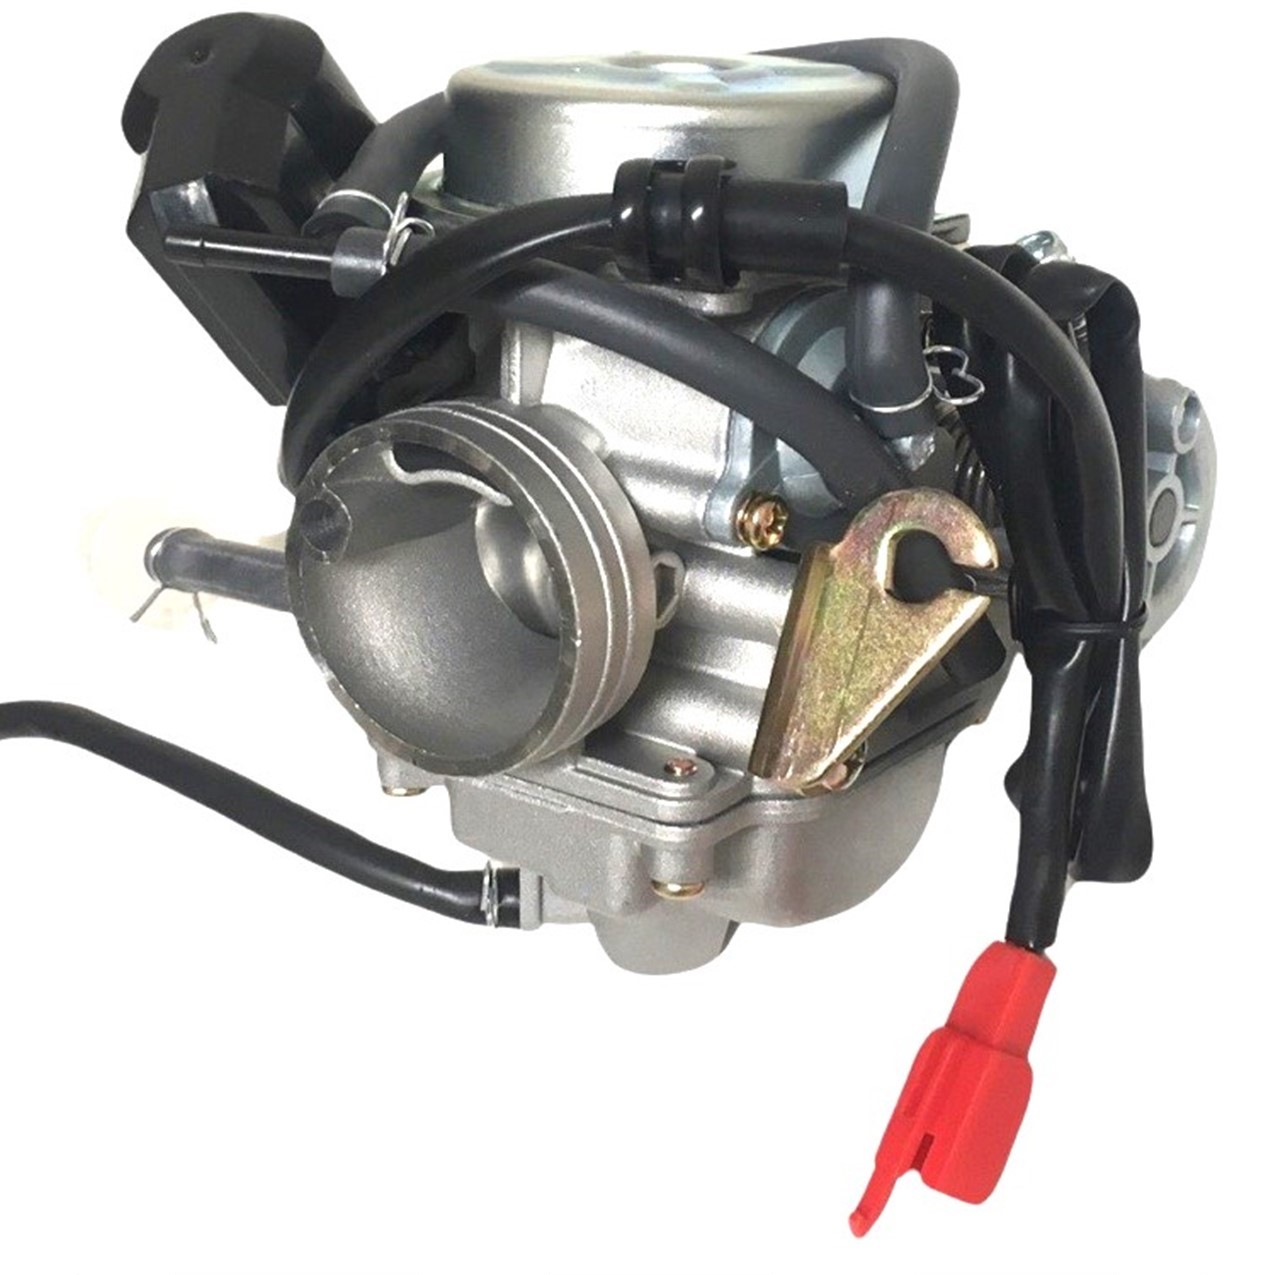 High Performance PD24J Carburetor Intake OD=32mm ID=26mm - 8% larger than standard. Air Box OD=42mm Fits Most GY6 125, 150, 180cc ATV, GoKarts, Motorcycles, Scooters